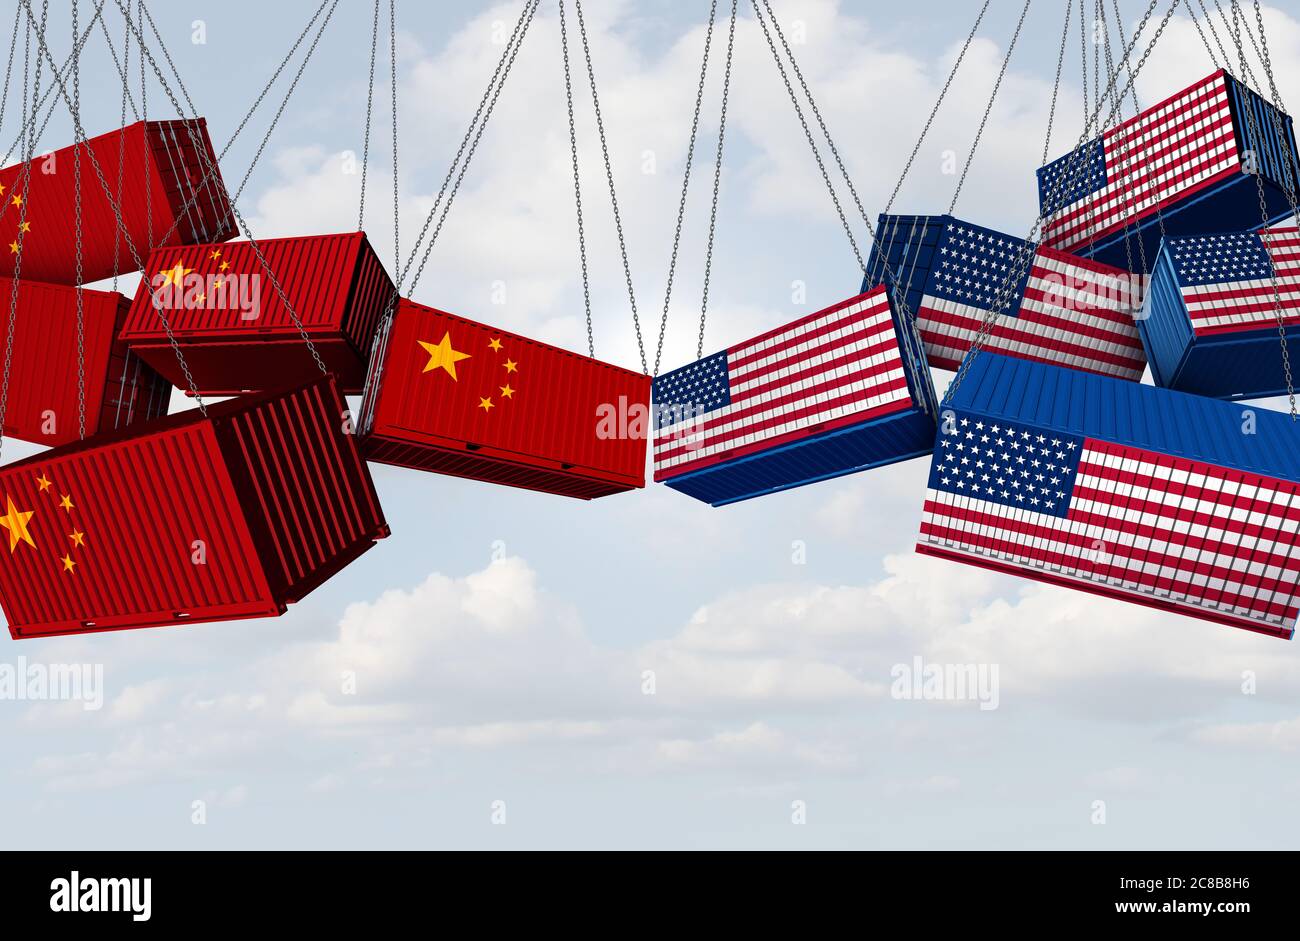 USA China trade war and American tariffs as opposing cargo freight containers in conflict as an economic and diplomatic dispute for imports exports. Stock Photo